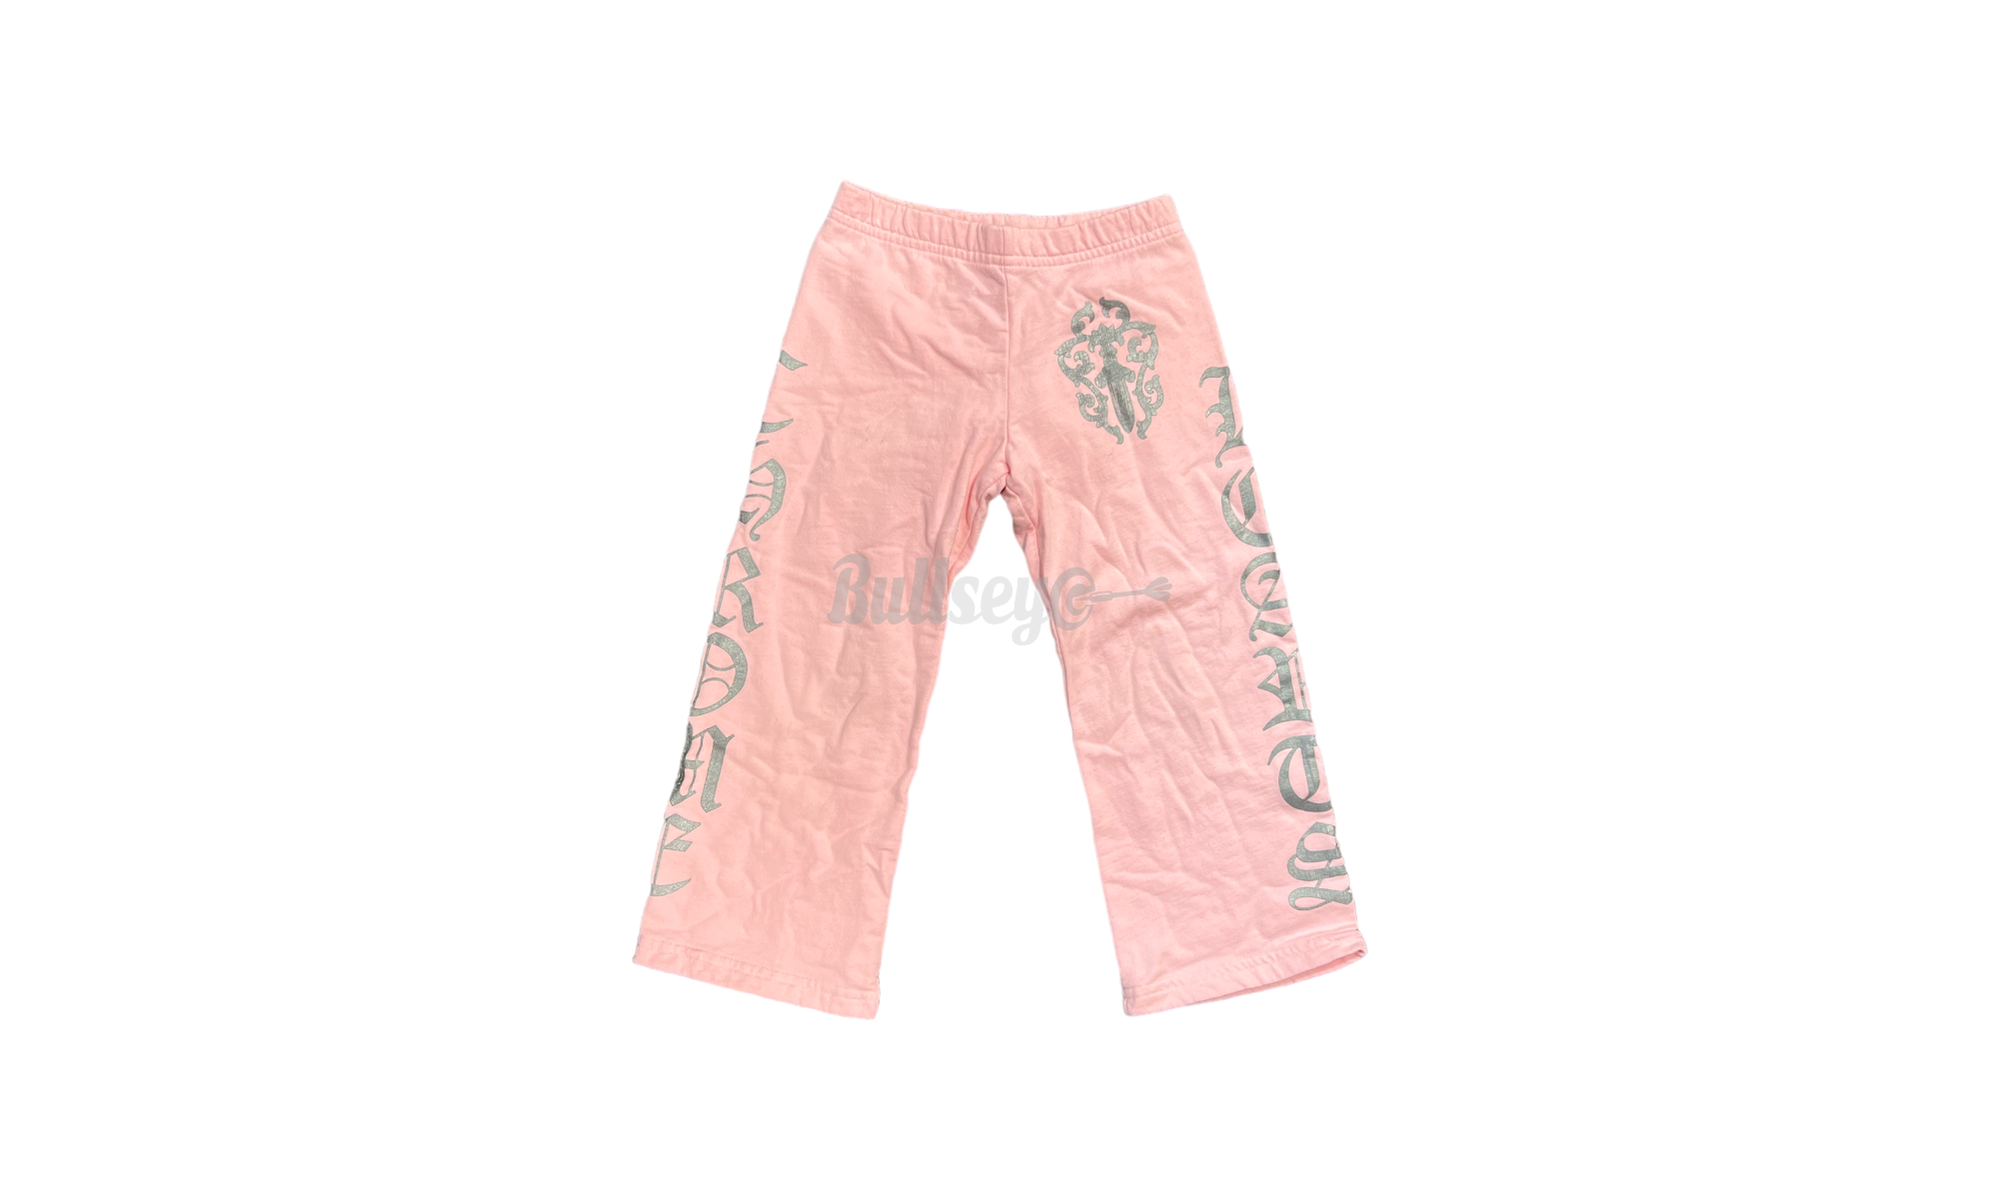 Chrome Hearts Pink Dagger Sweatpants Kids (PreOwned)